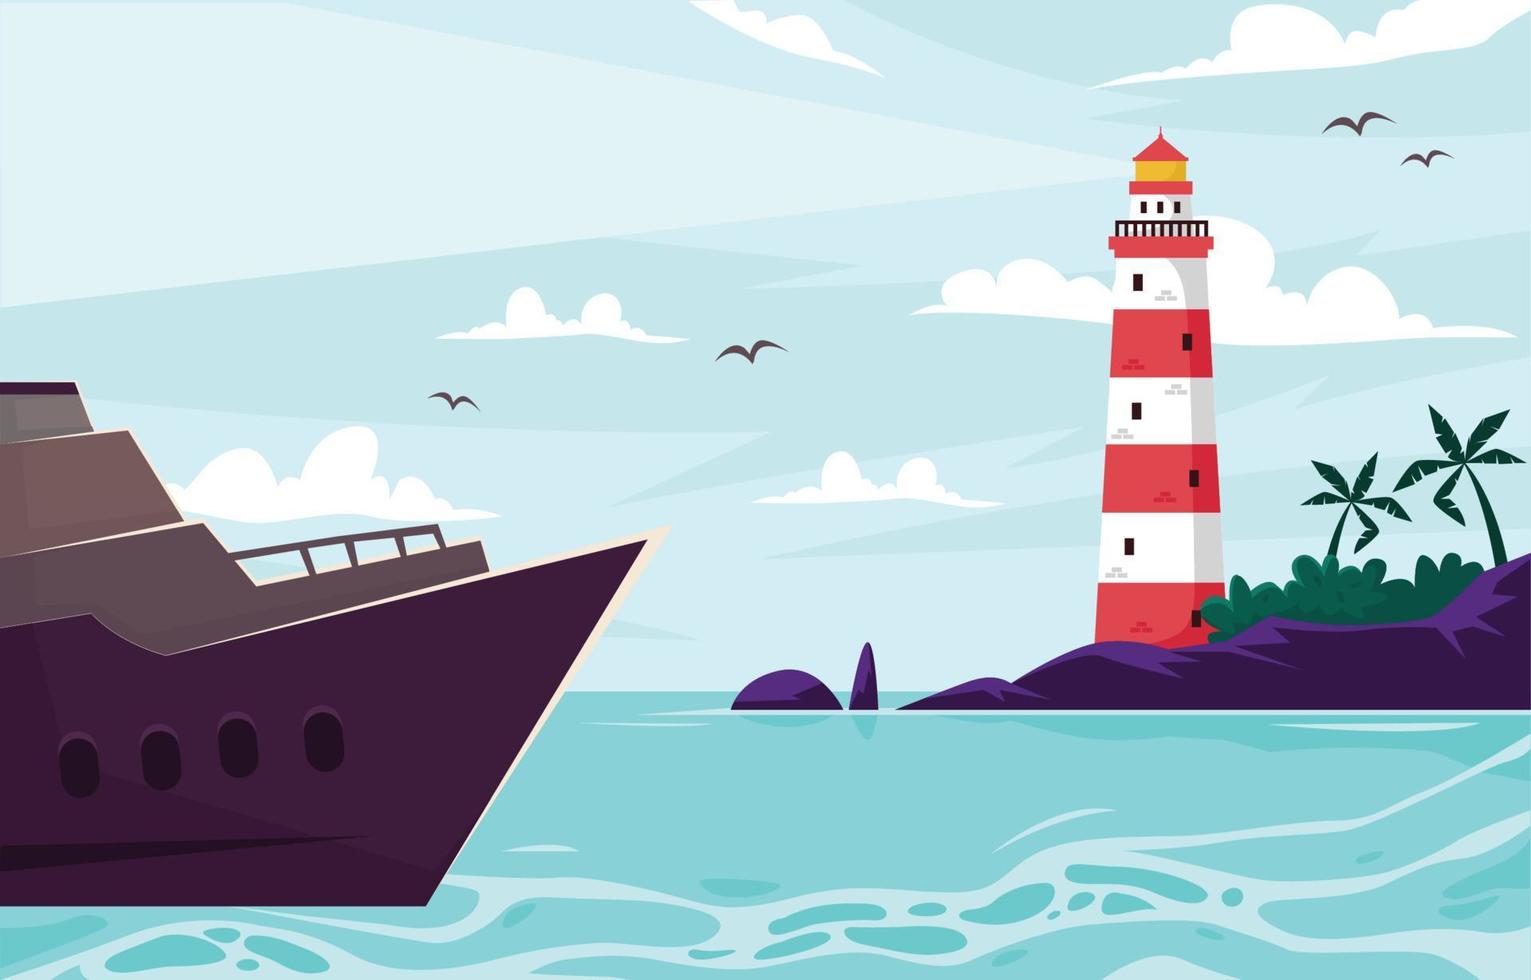 Background of Blue Sea with Boat and Lighthouse vector